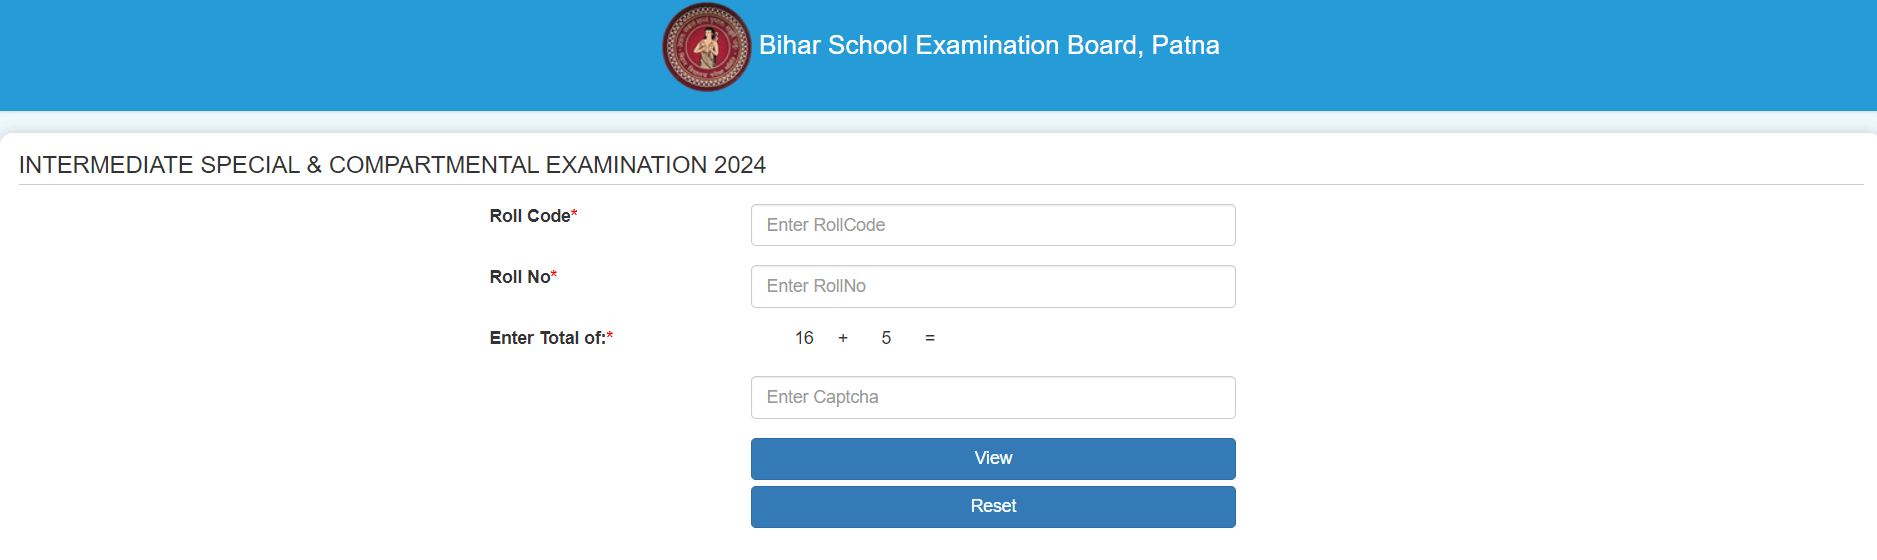 BSEB compartment exam 12th result login window 2024